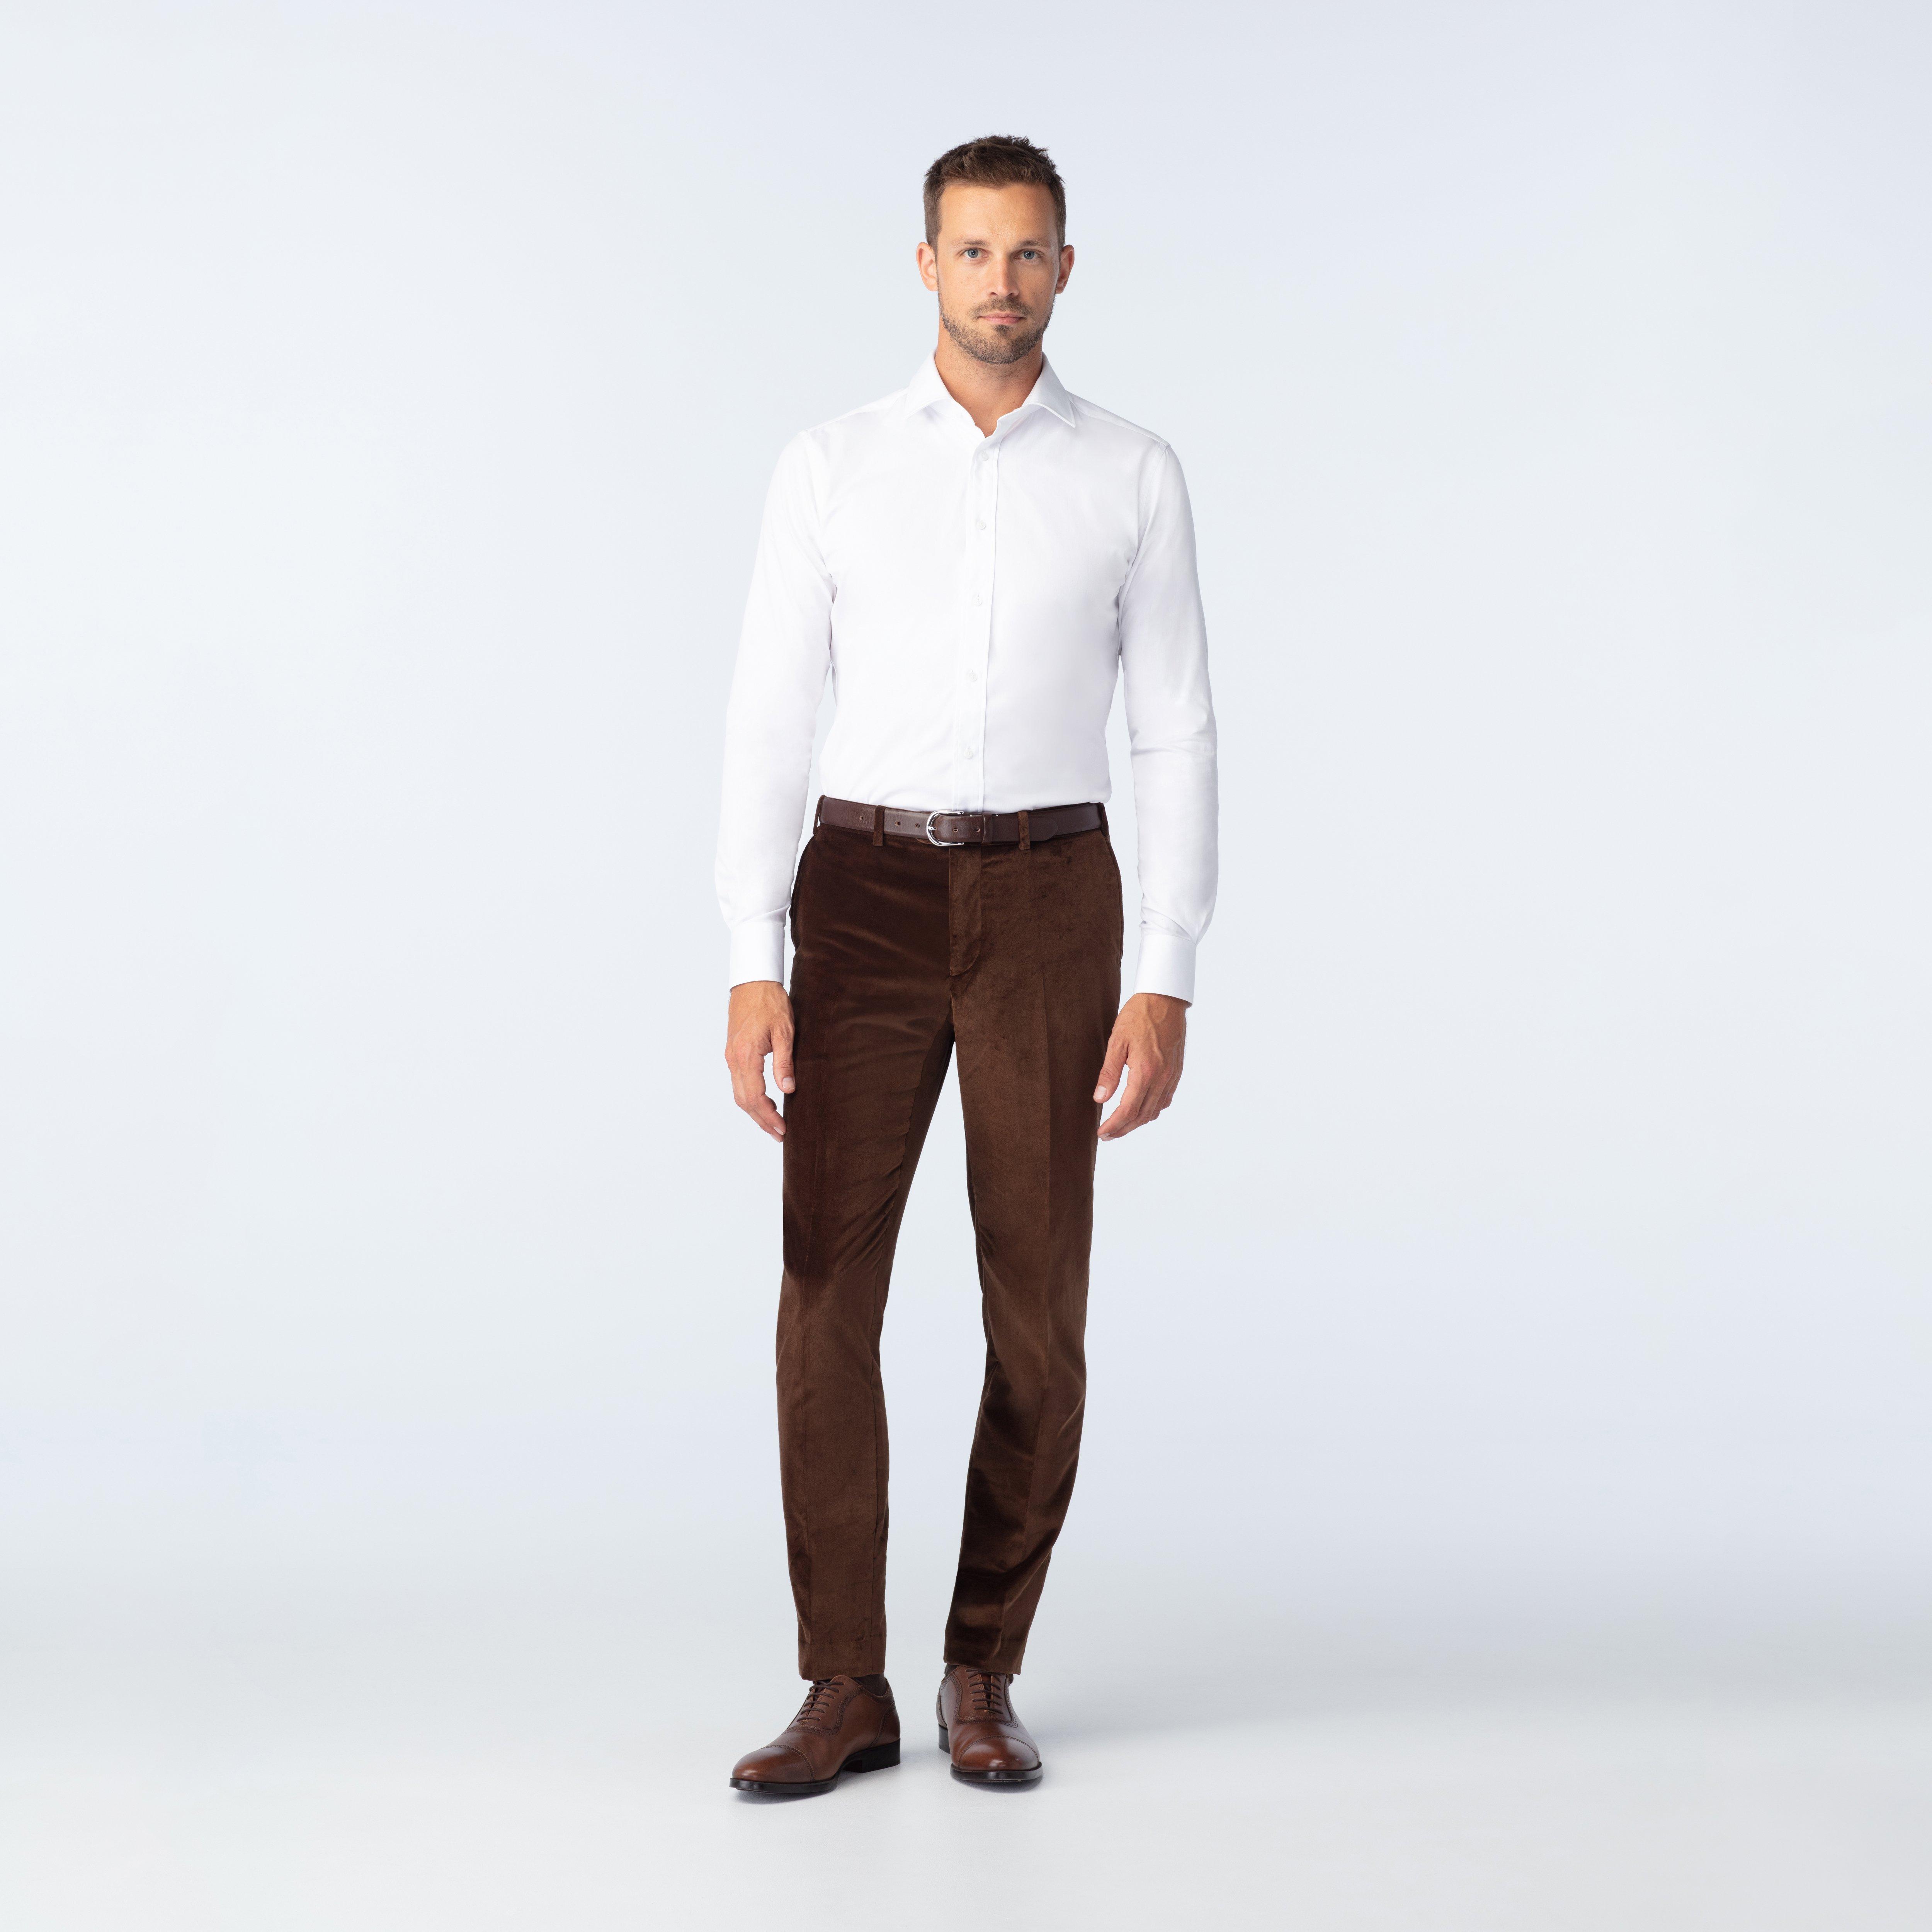 Best Trouser Formal: Top 10 Formal Pants Styles and Combinations for Men